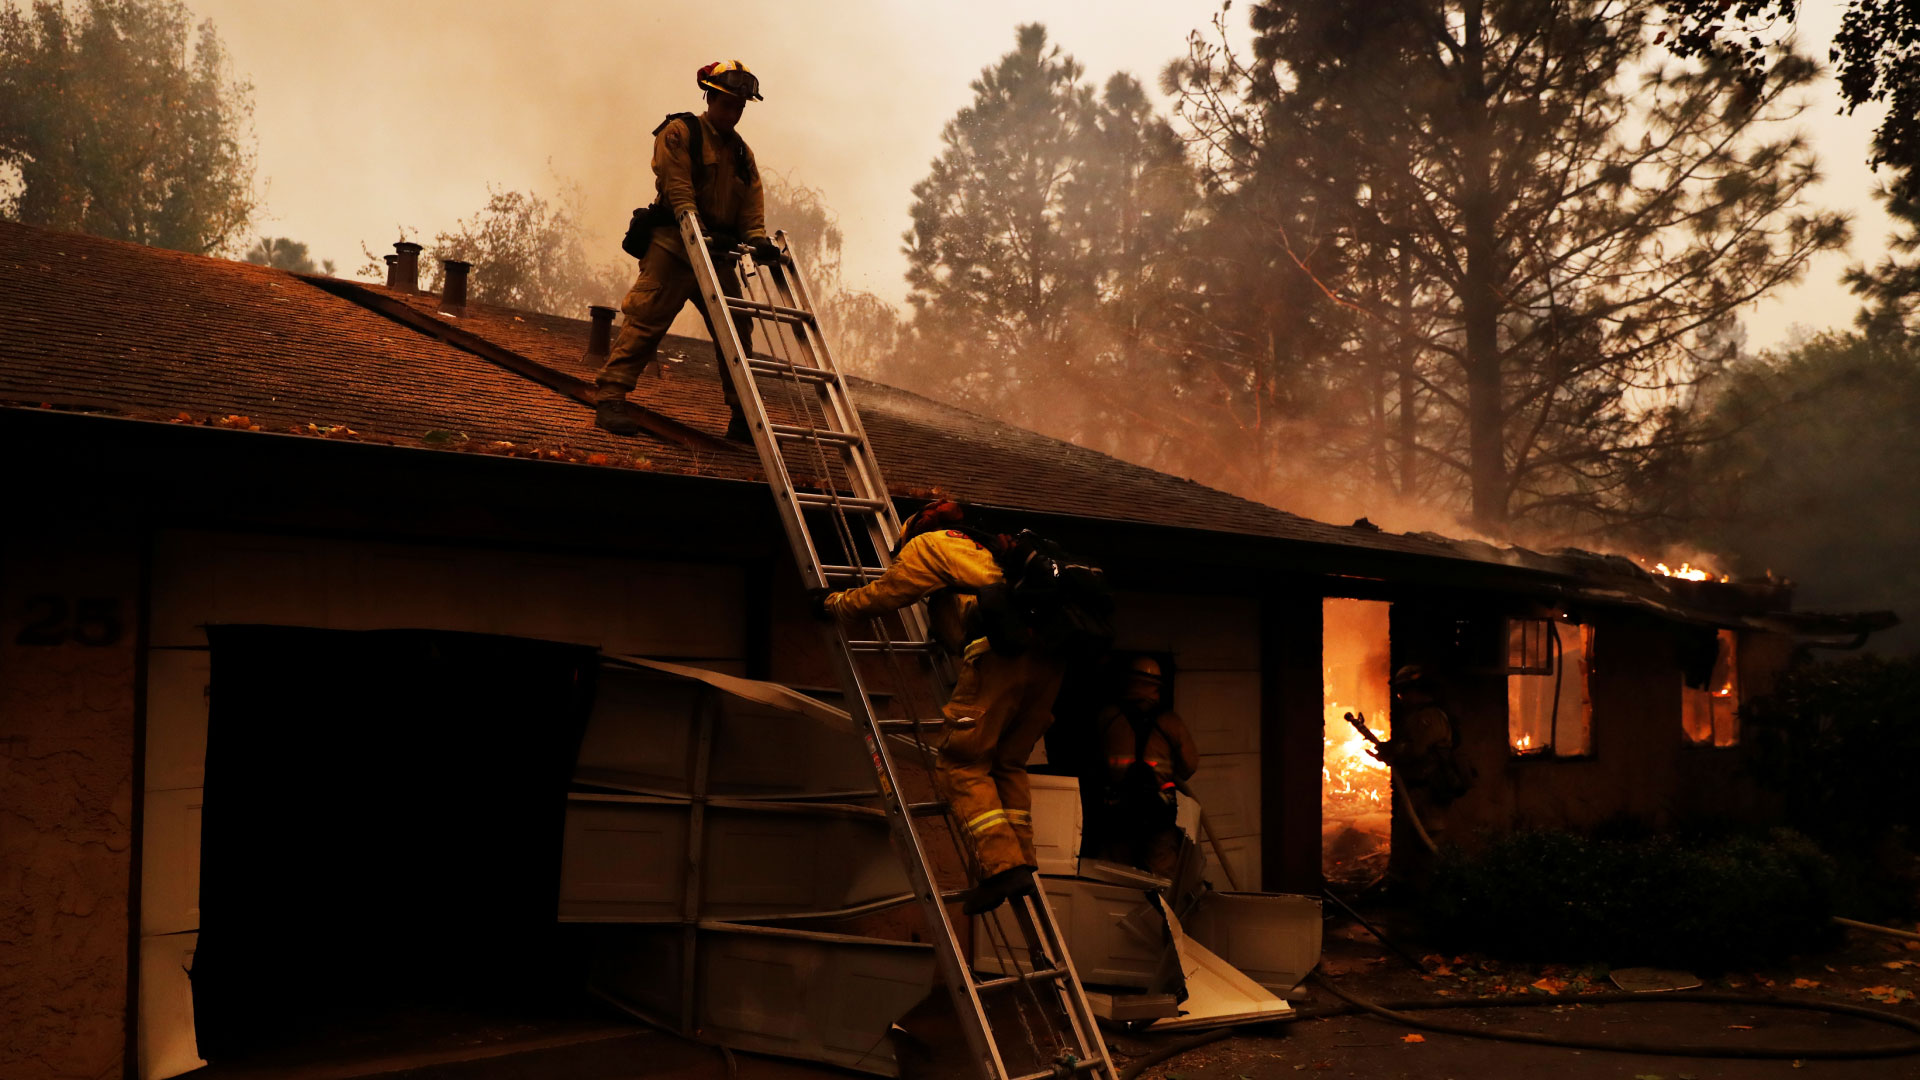  Cal Fire firefighter climbs a ladder by a burning structure while battling the Camp Fire in Paradise, California, U.S., November 9, 2018